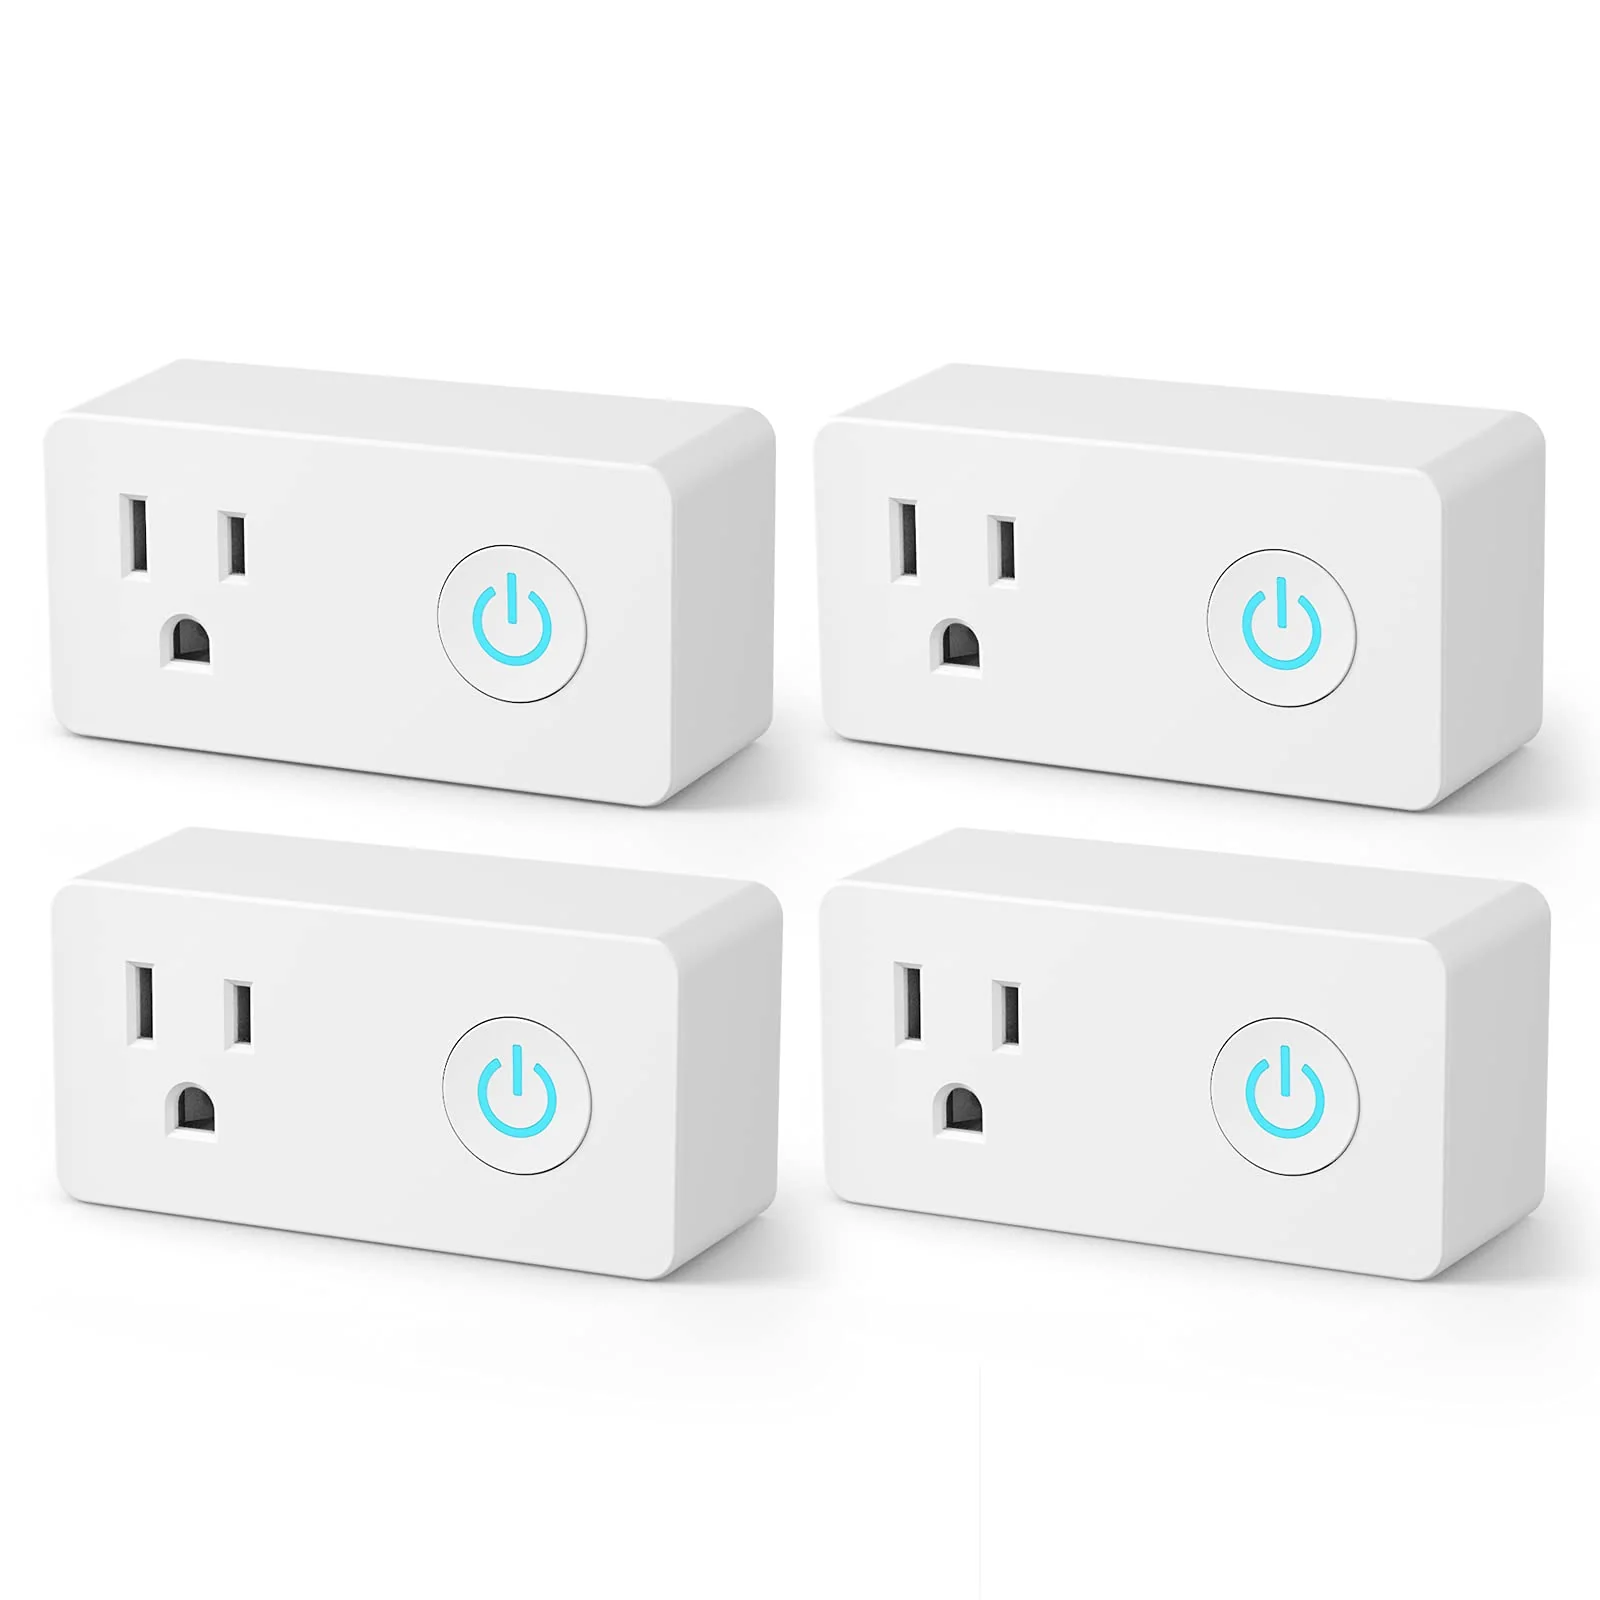 Enhance Your Home Automation with Bn-Link's Smart WiFi Outlet Hubless Timer 4 Pack